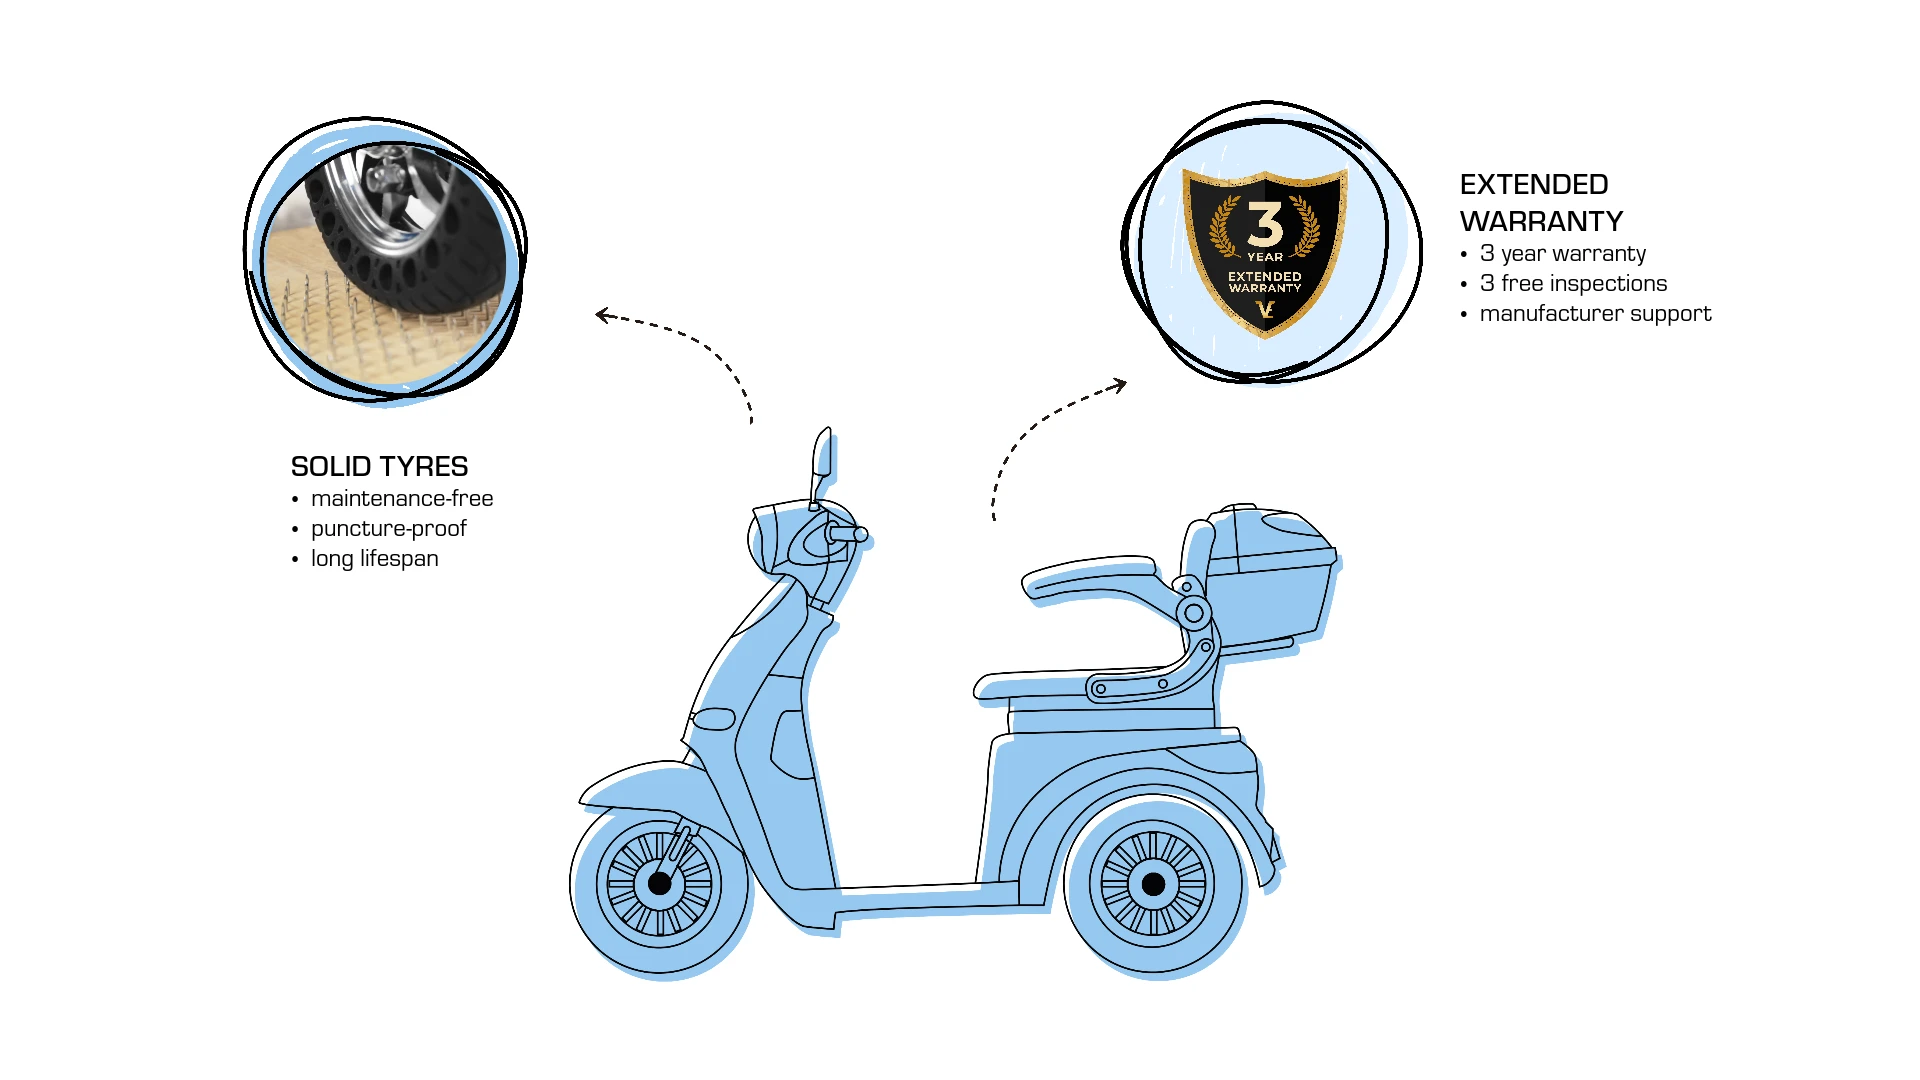 Veleco CRISTAL extras, upgrades, solid tyres for mobility scooter